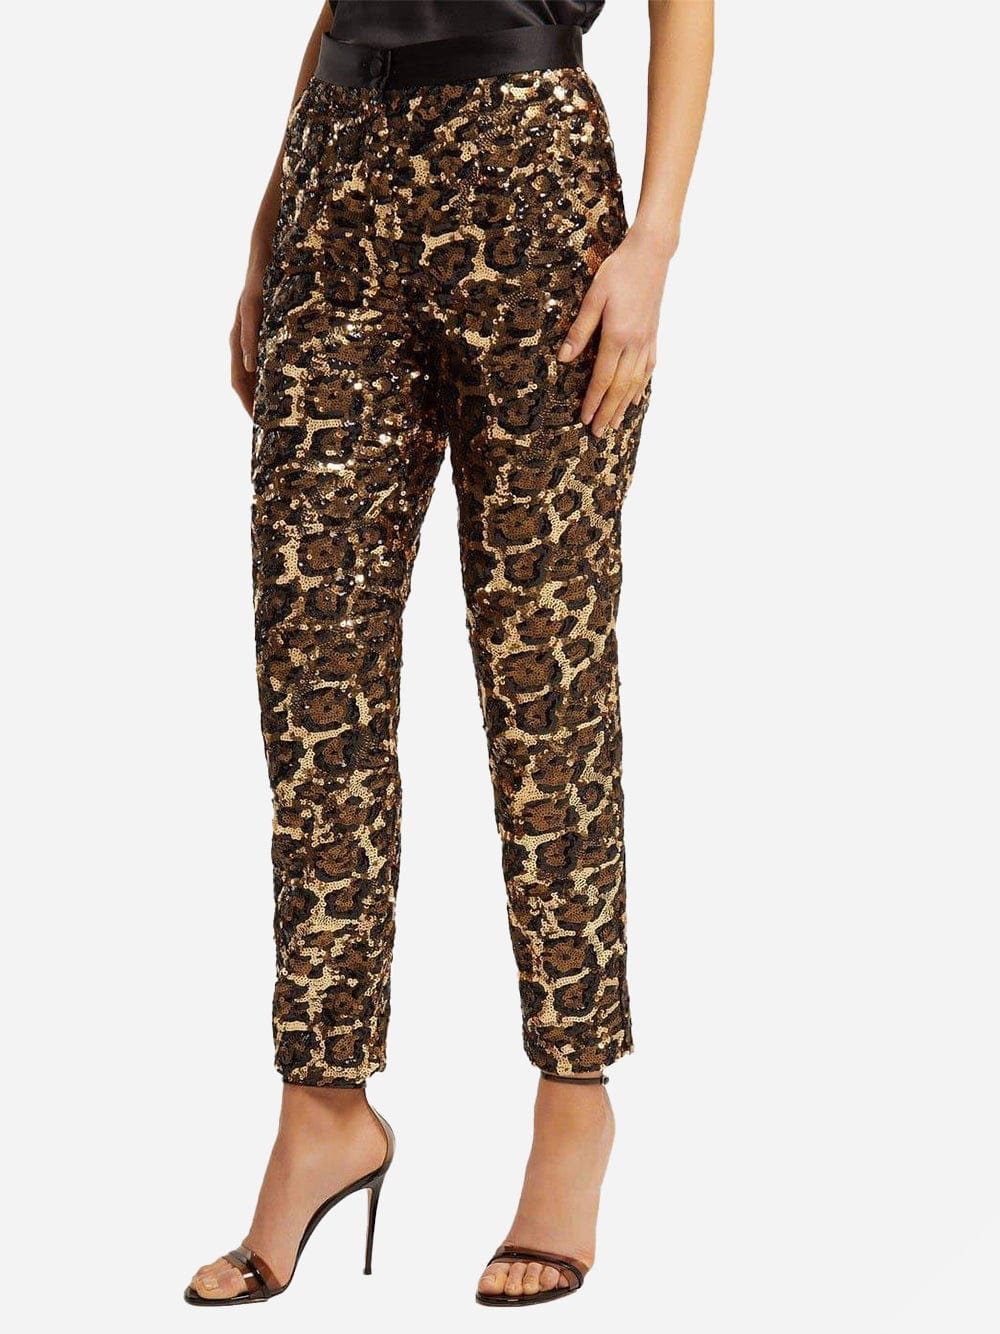 Dolce & Gabbana Leopard Sequined Trousers